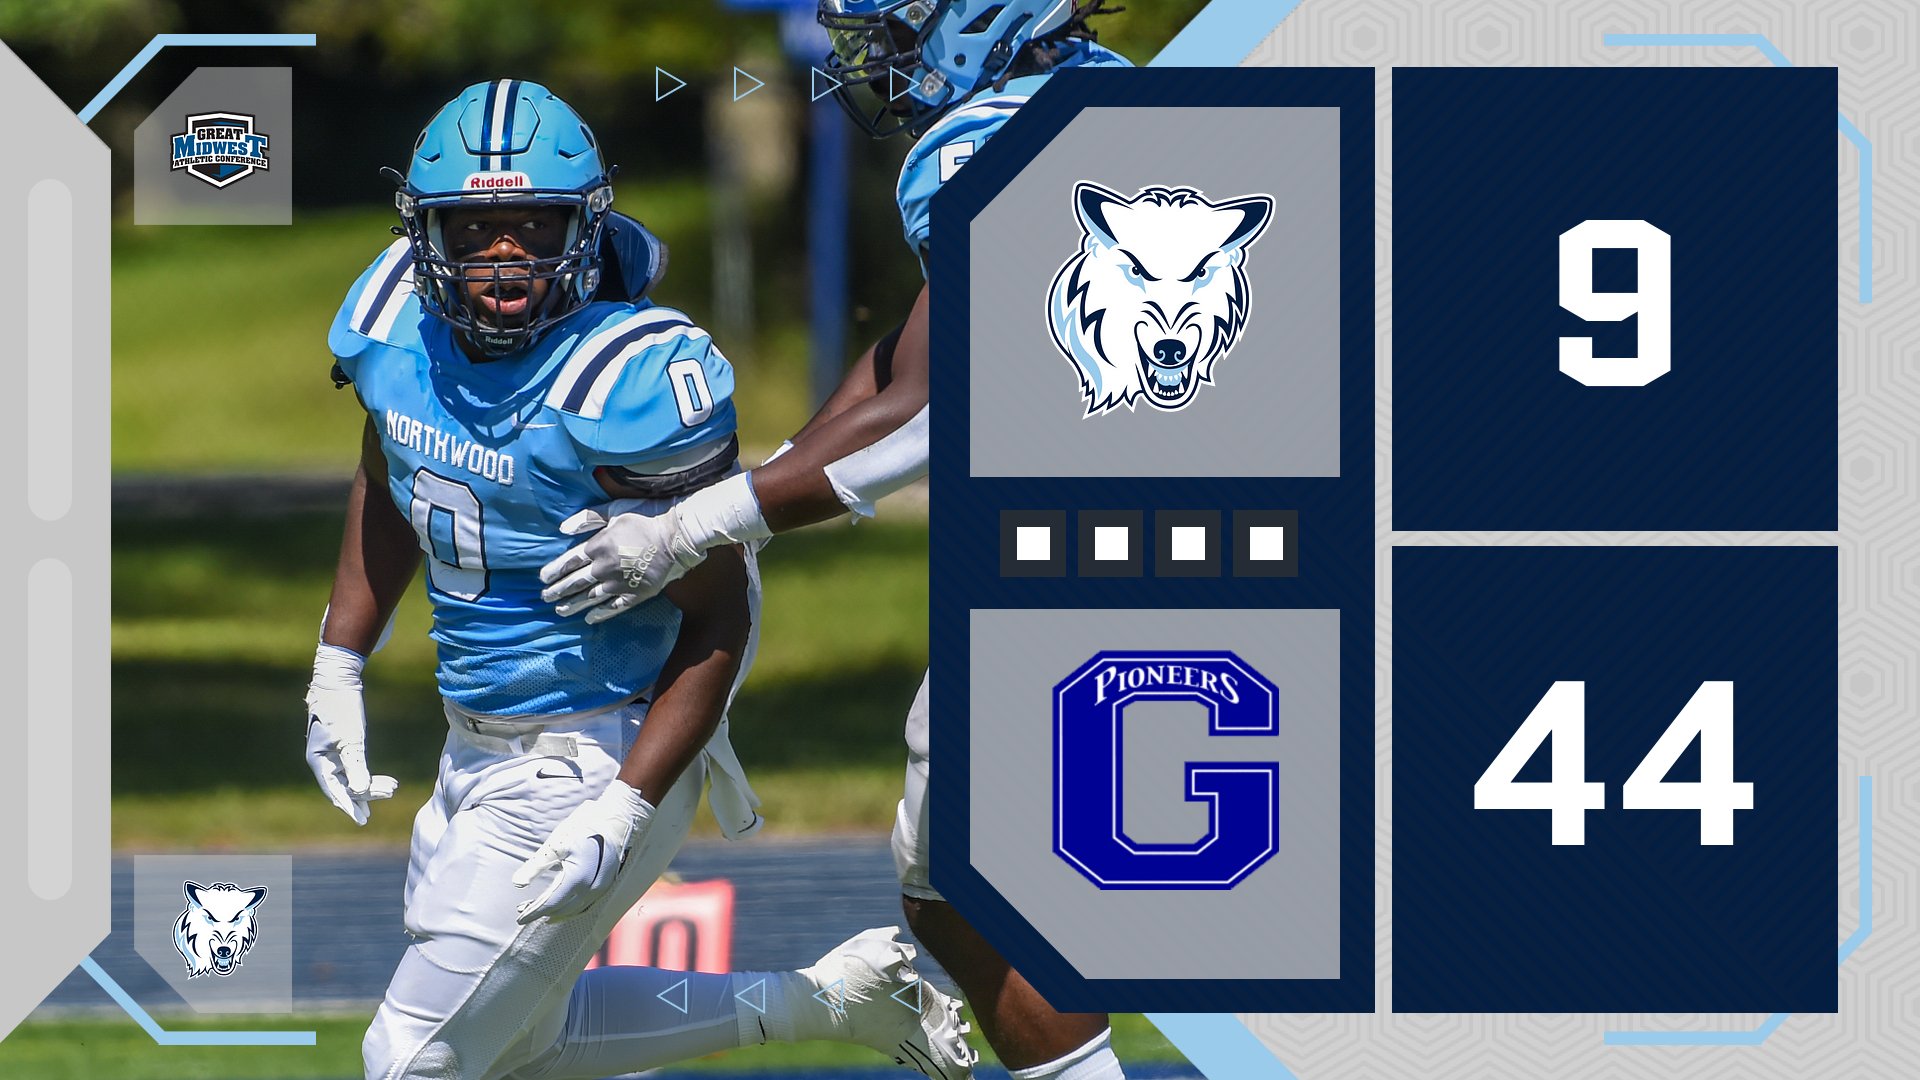 Football Falls In Opener 44-9 To Glenville State